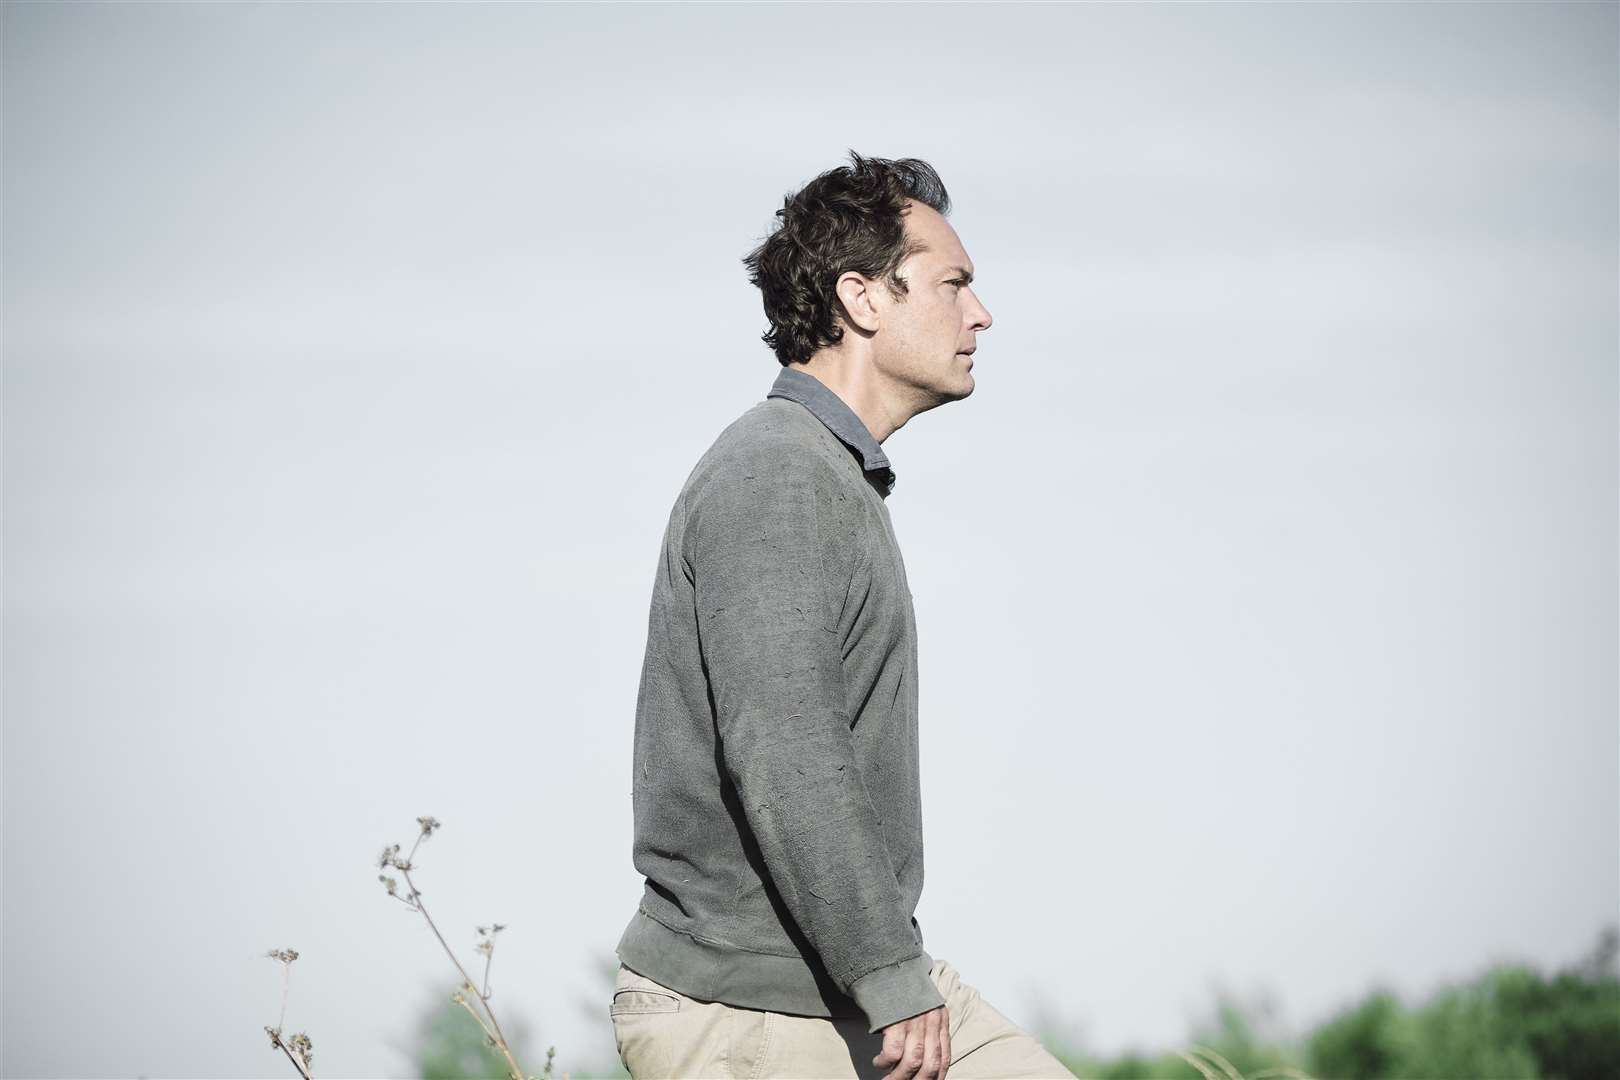 Jude Law in Sky's new thriller series The Third Day, which was part filmed on Sheppey. Picture: Sky/HBO